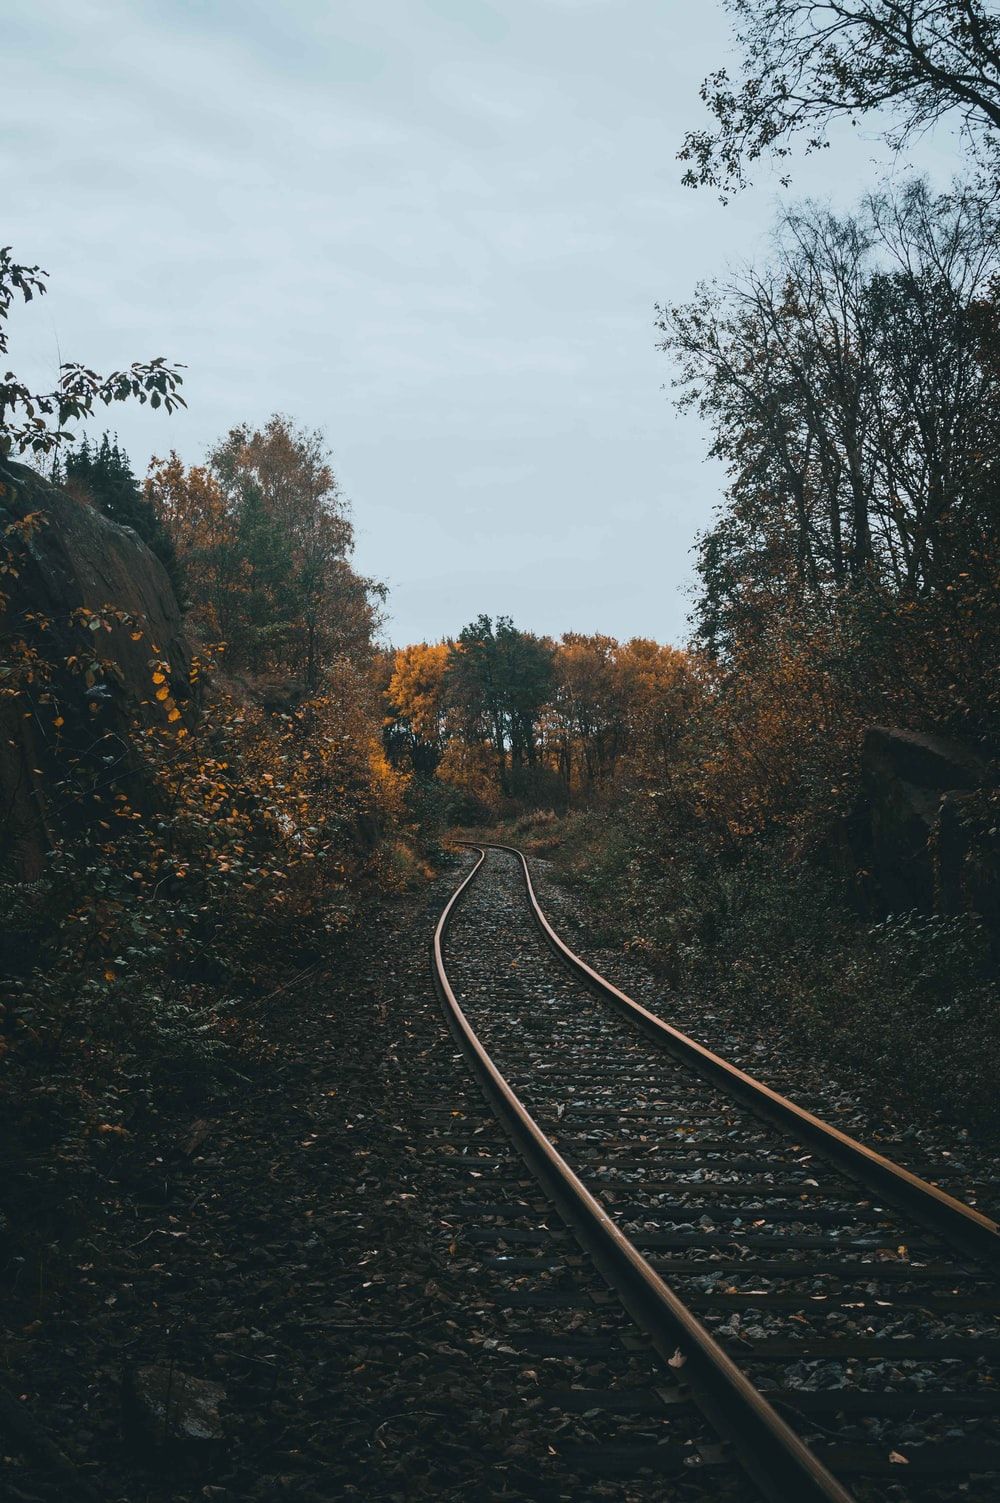 Train Tracks Picture. Download Free Image